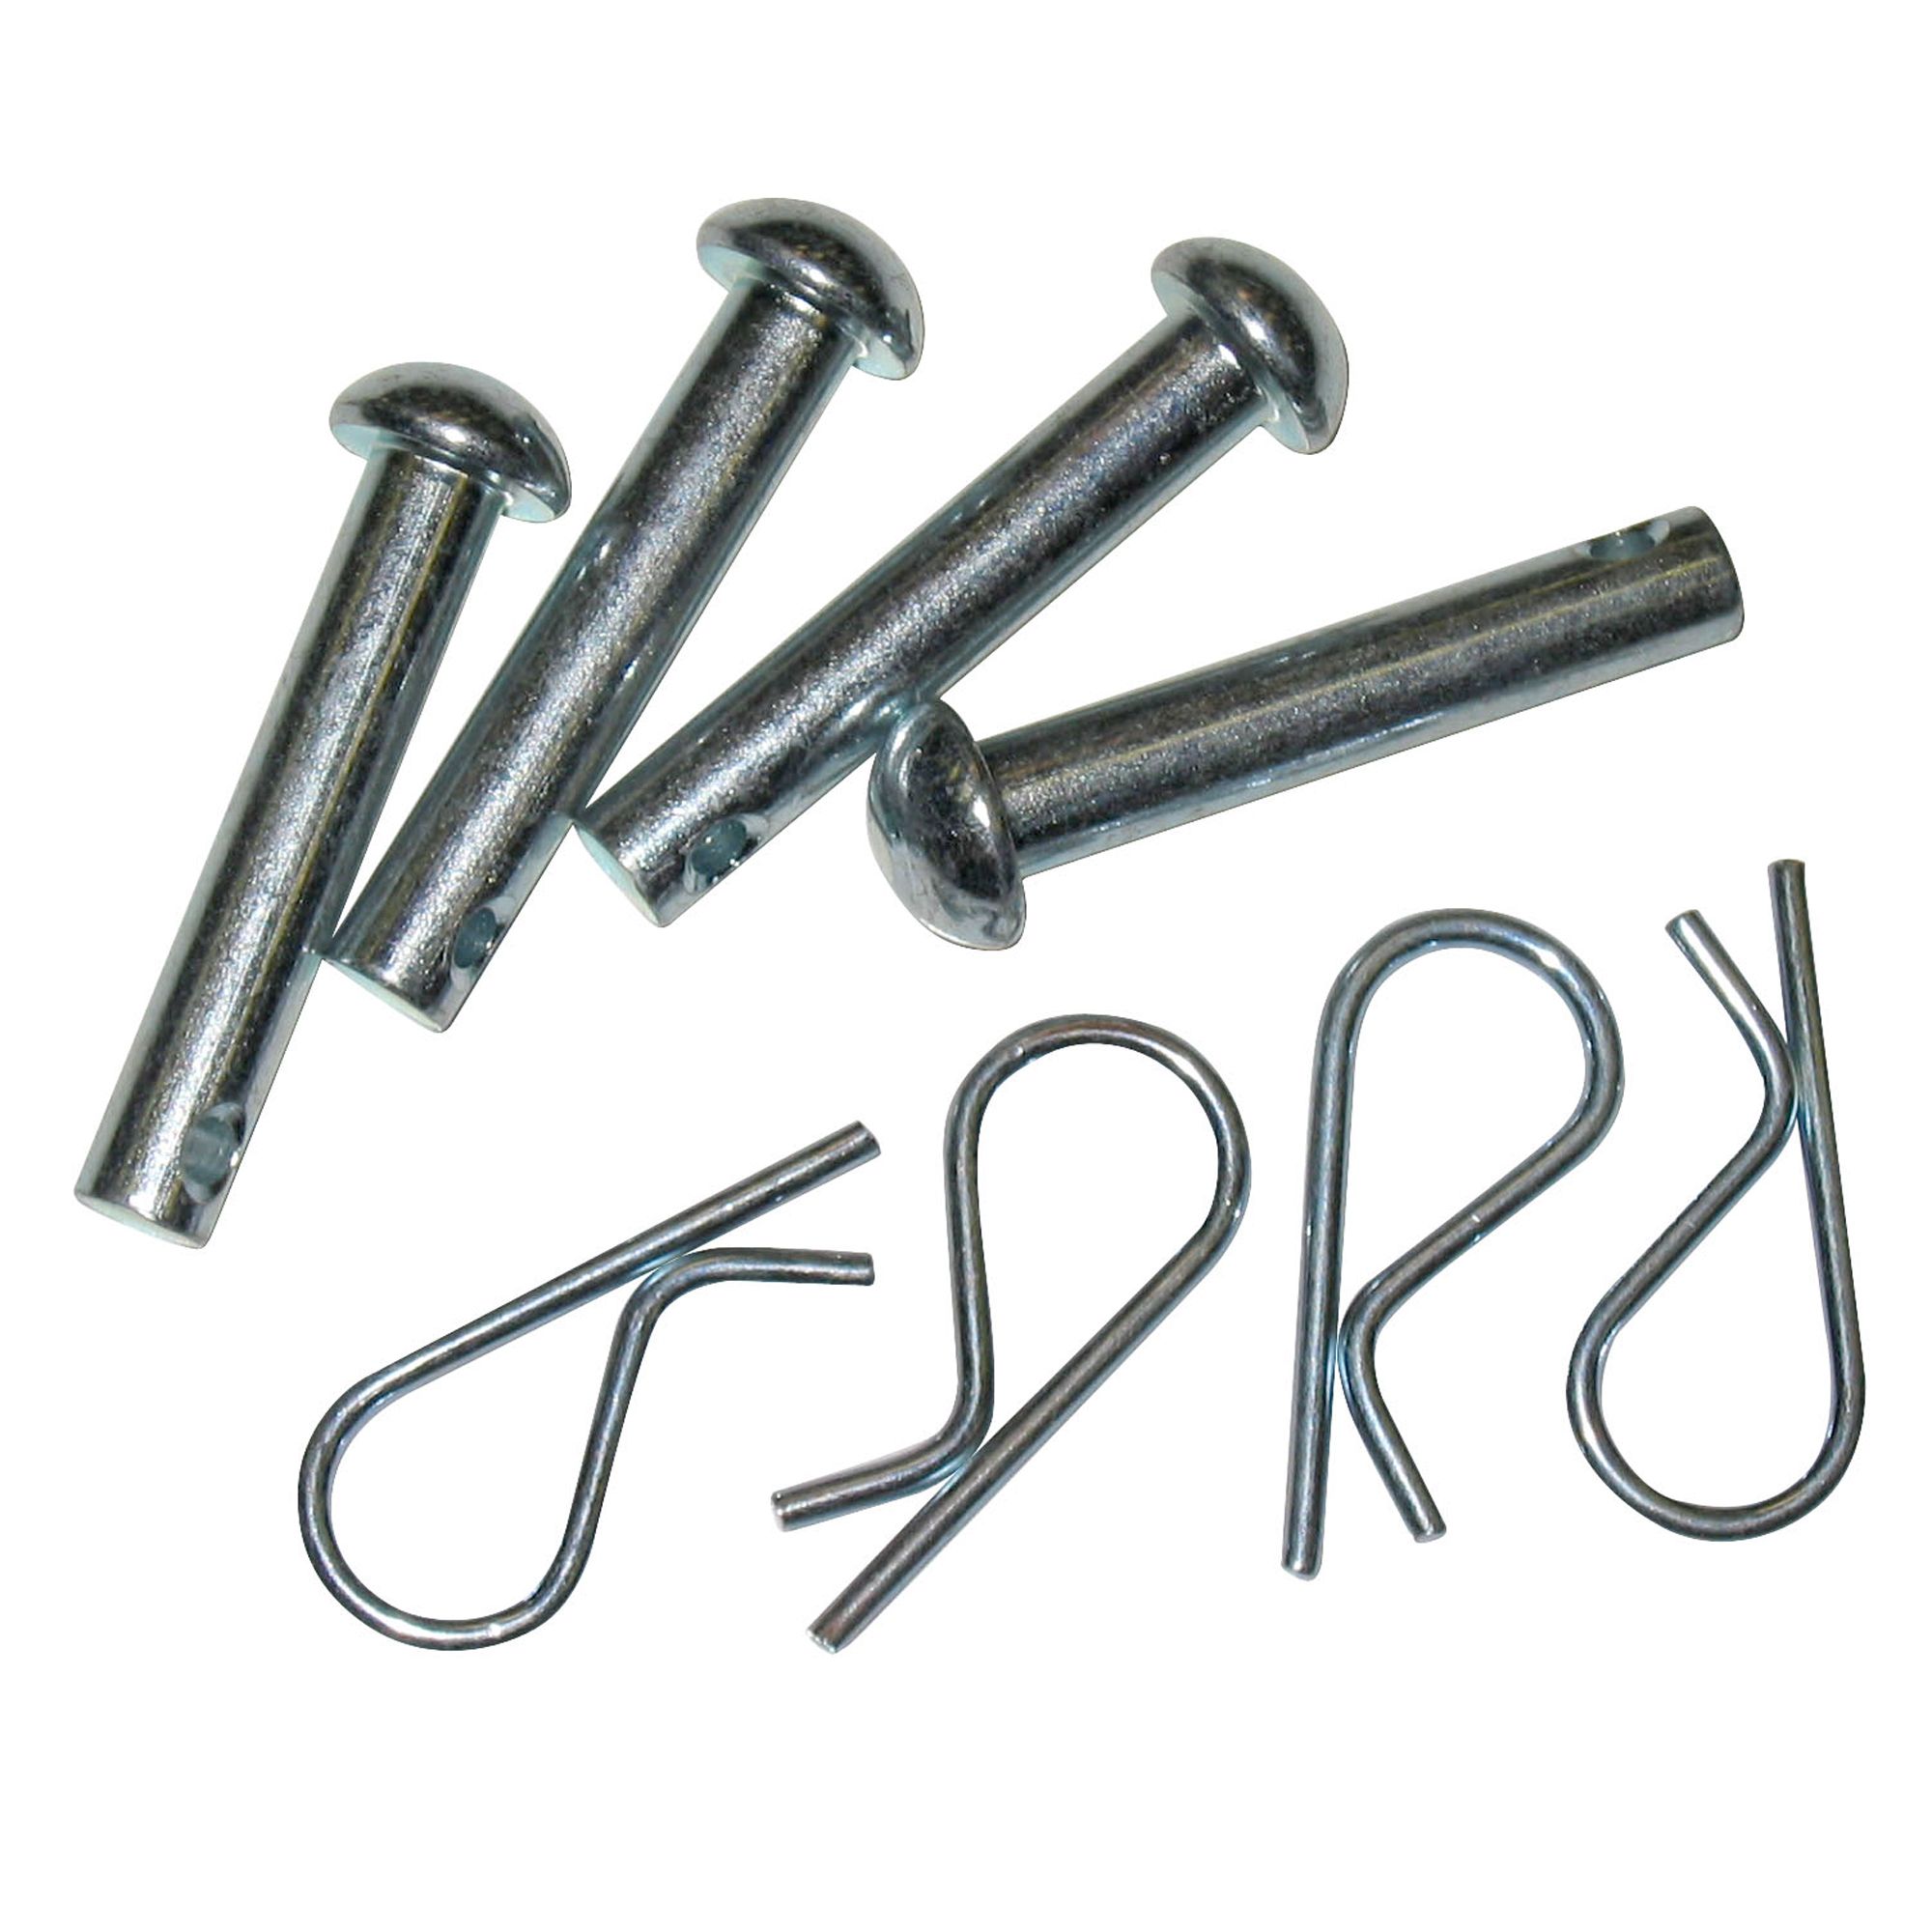 Outdoor Factory Parts 132673 Tiller Shear Pins With Clips - 4 Pack